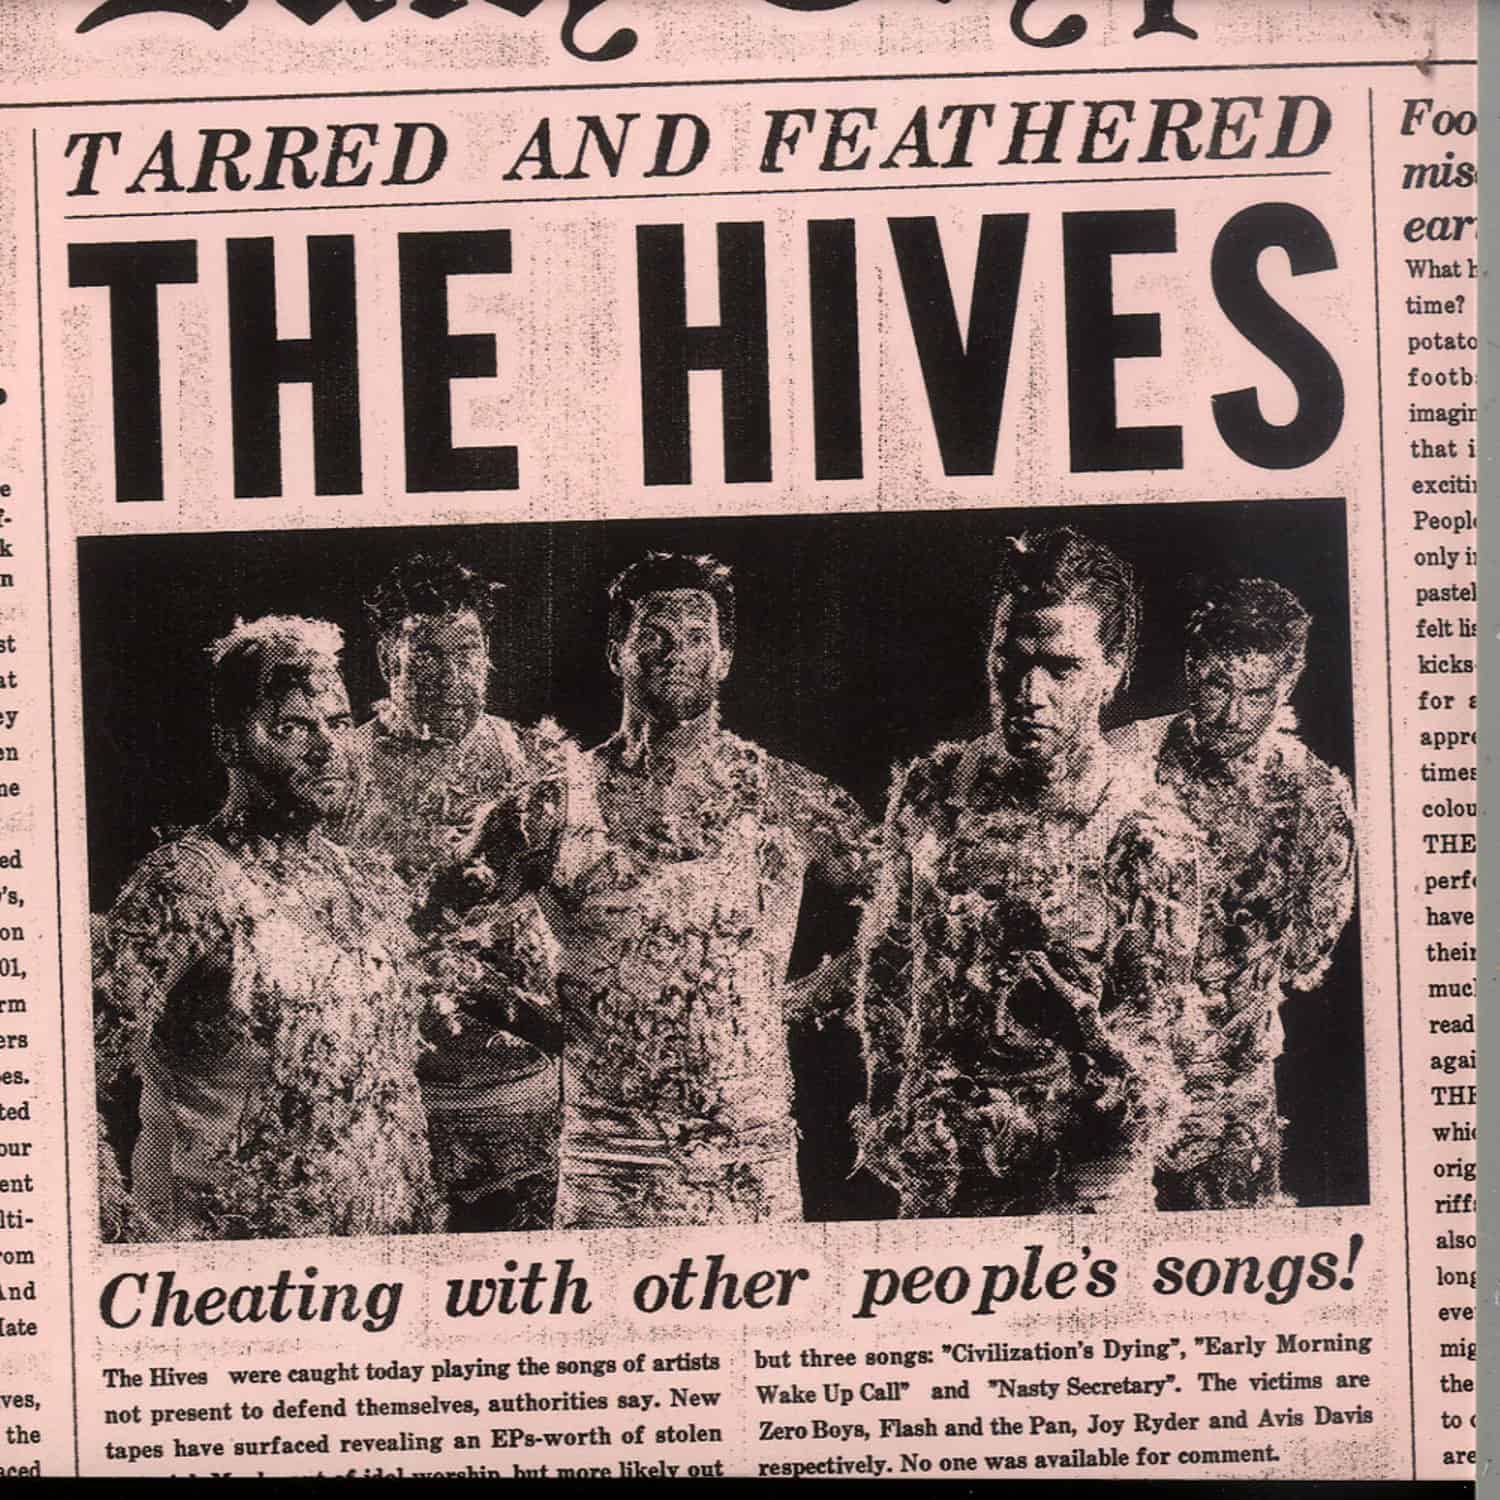 The Hives - TARRED AND FEATHERED 